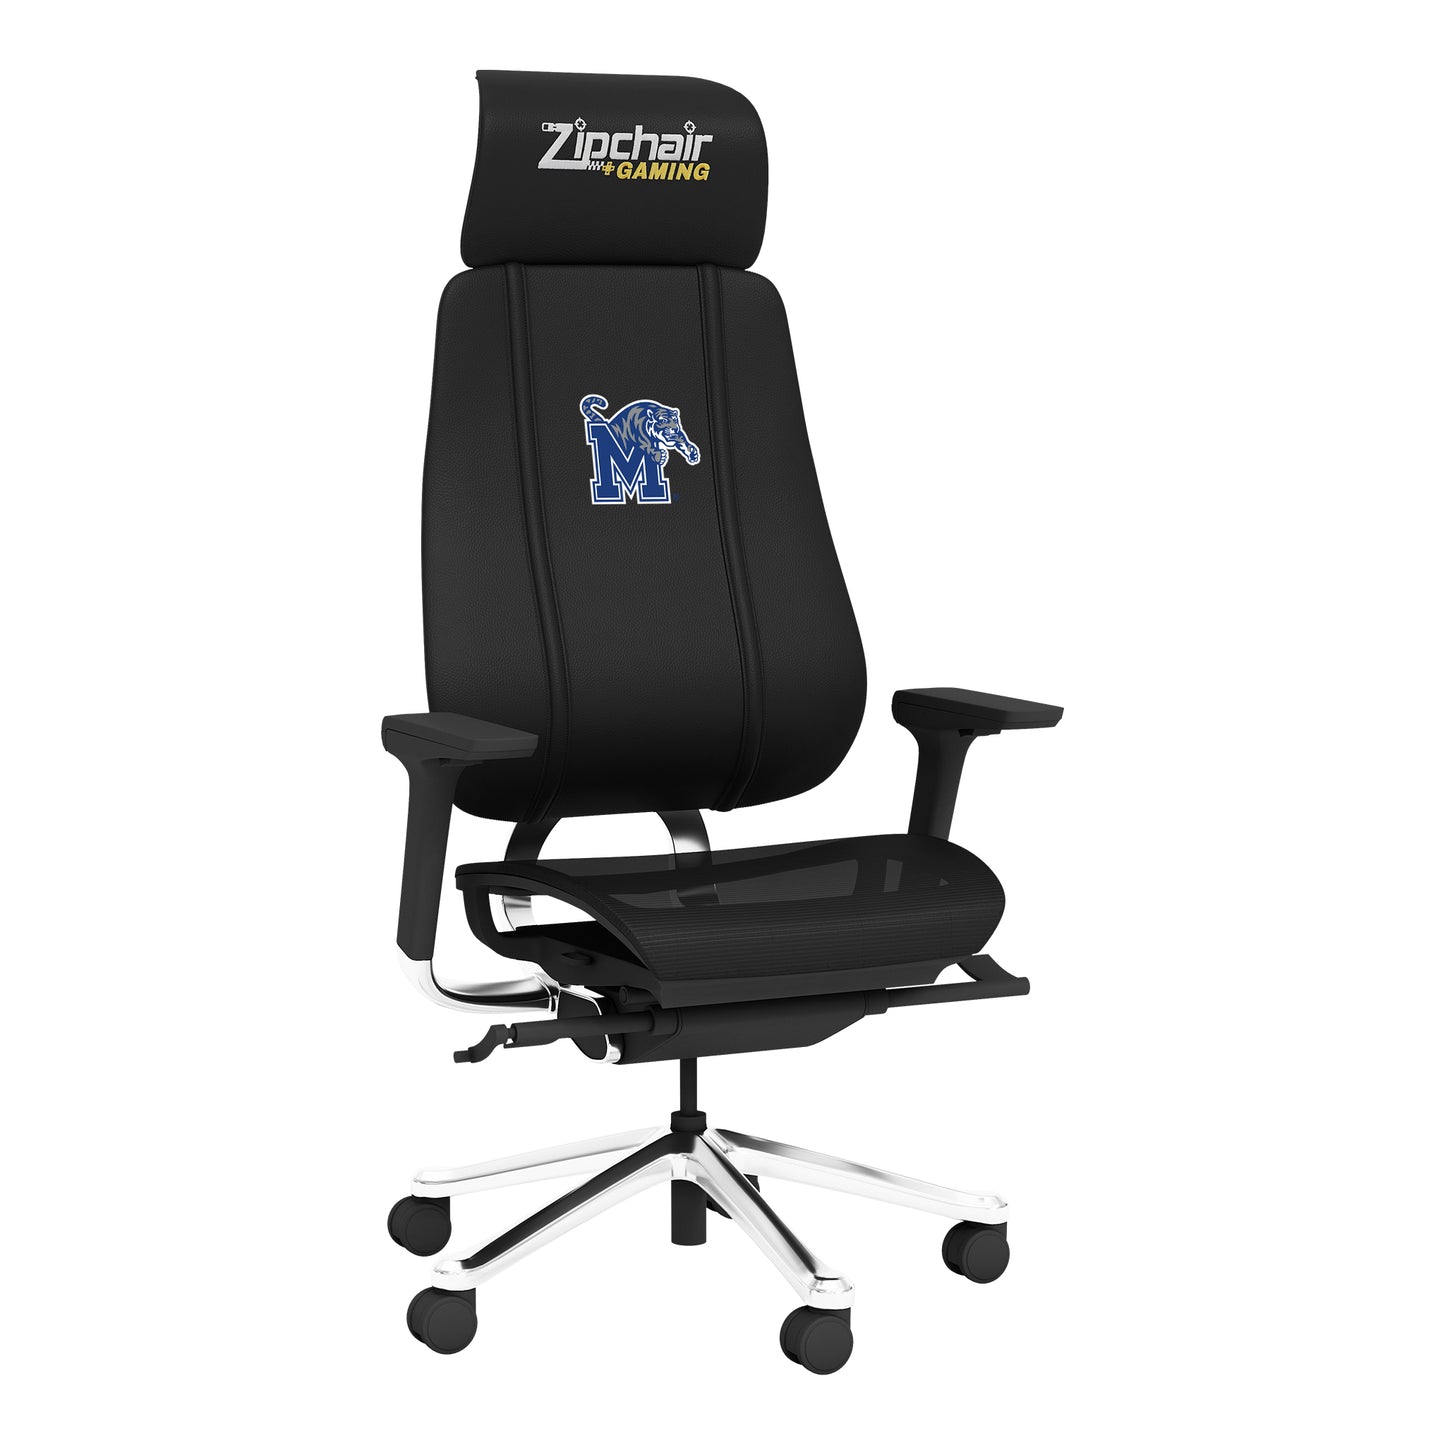 PhantomX Gaming Chair with Memphis Tigers Primary Logo